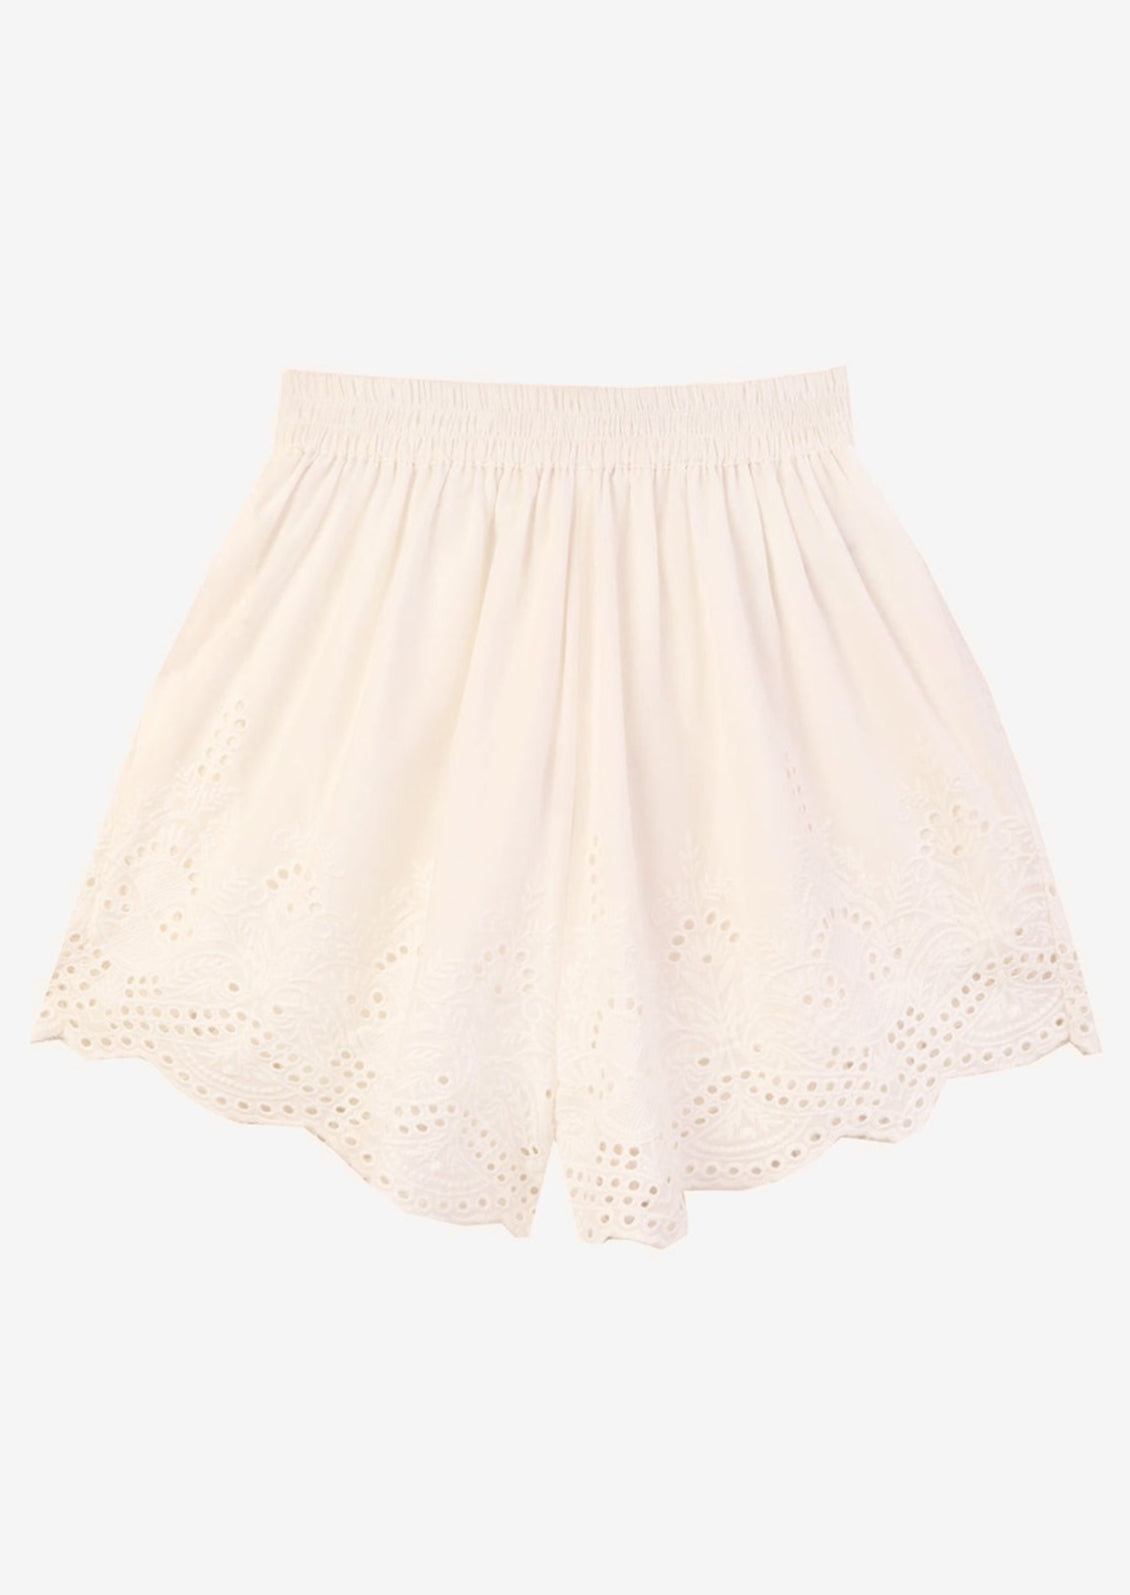 A pair of white cotton lacy shorts with elasticized waistband.